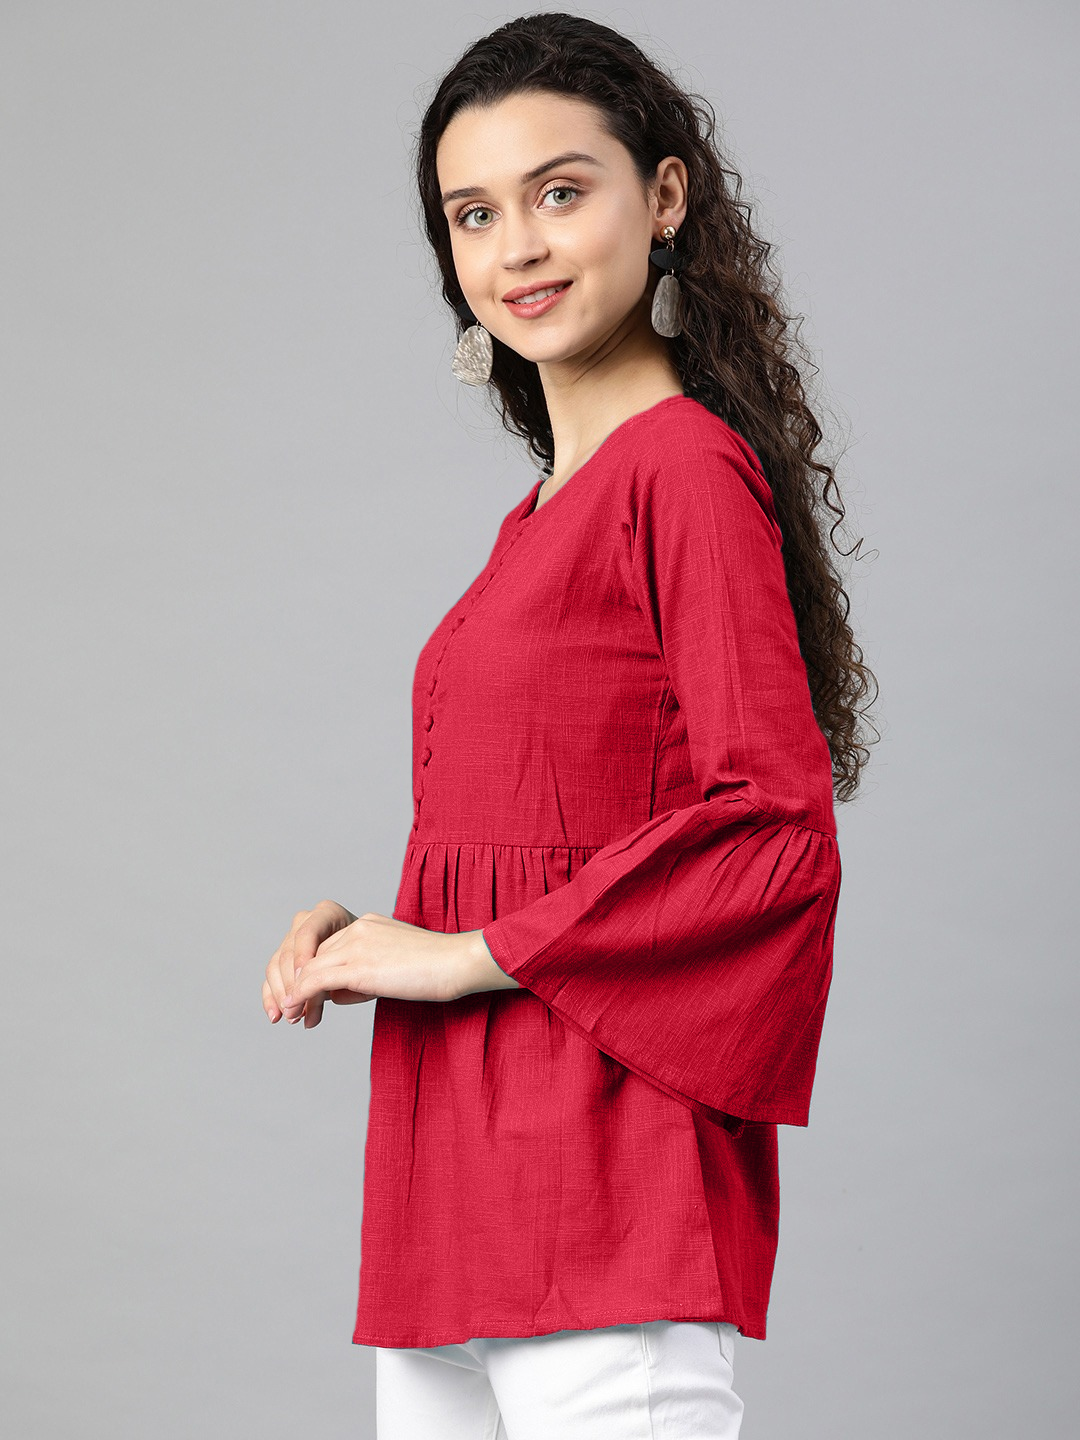 Shubhlaxmi Garments Full Sleeves Plain Cotton Girls Casual Tops, Size : Xl,  Free, Style : Latest at Rs 255 / Piece in Delhi